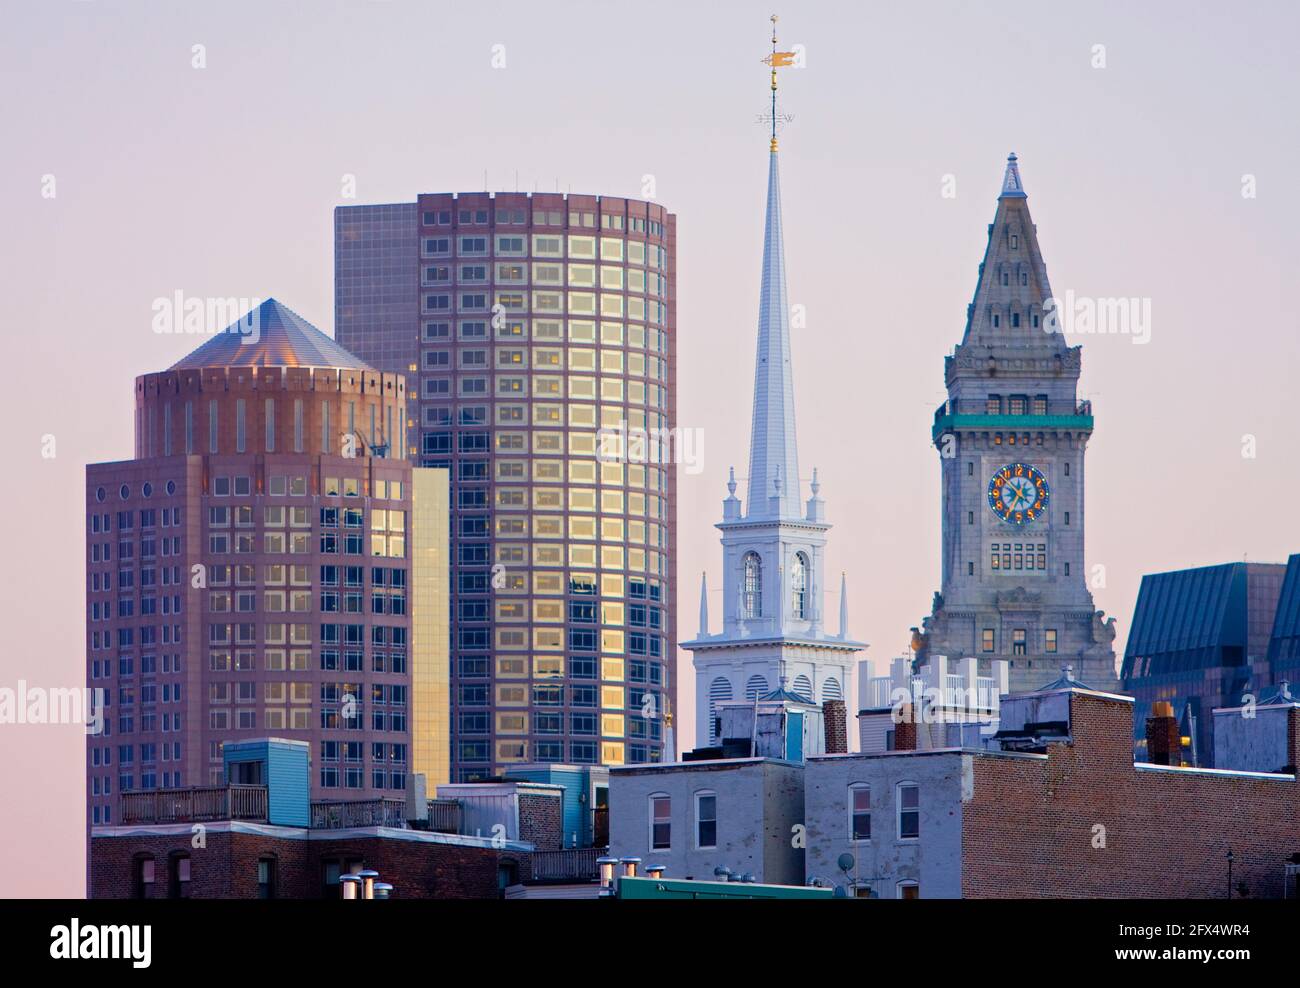 Cityscape of Boston Architecture examples old and new, North End and Waterfront, Boston MA USA Stock Photo